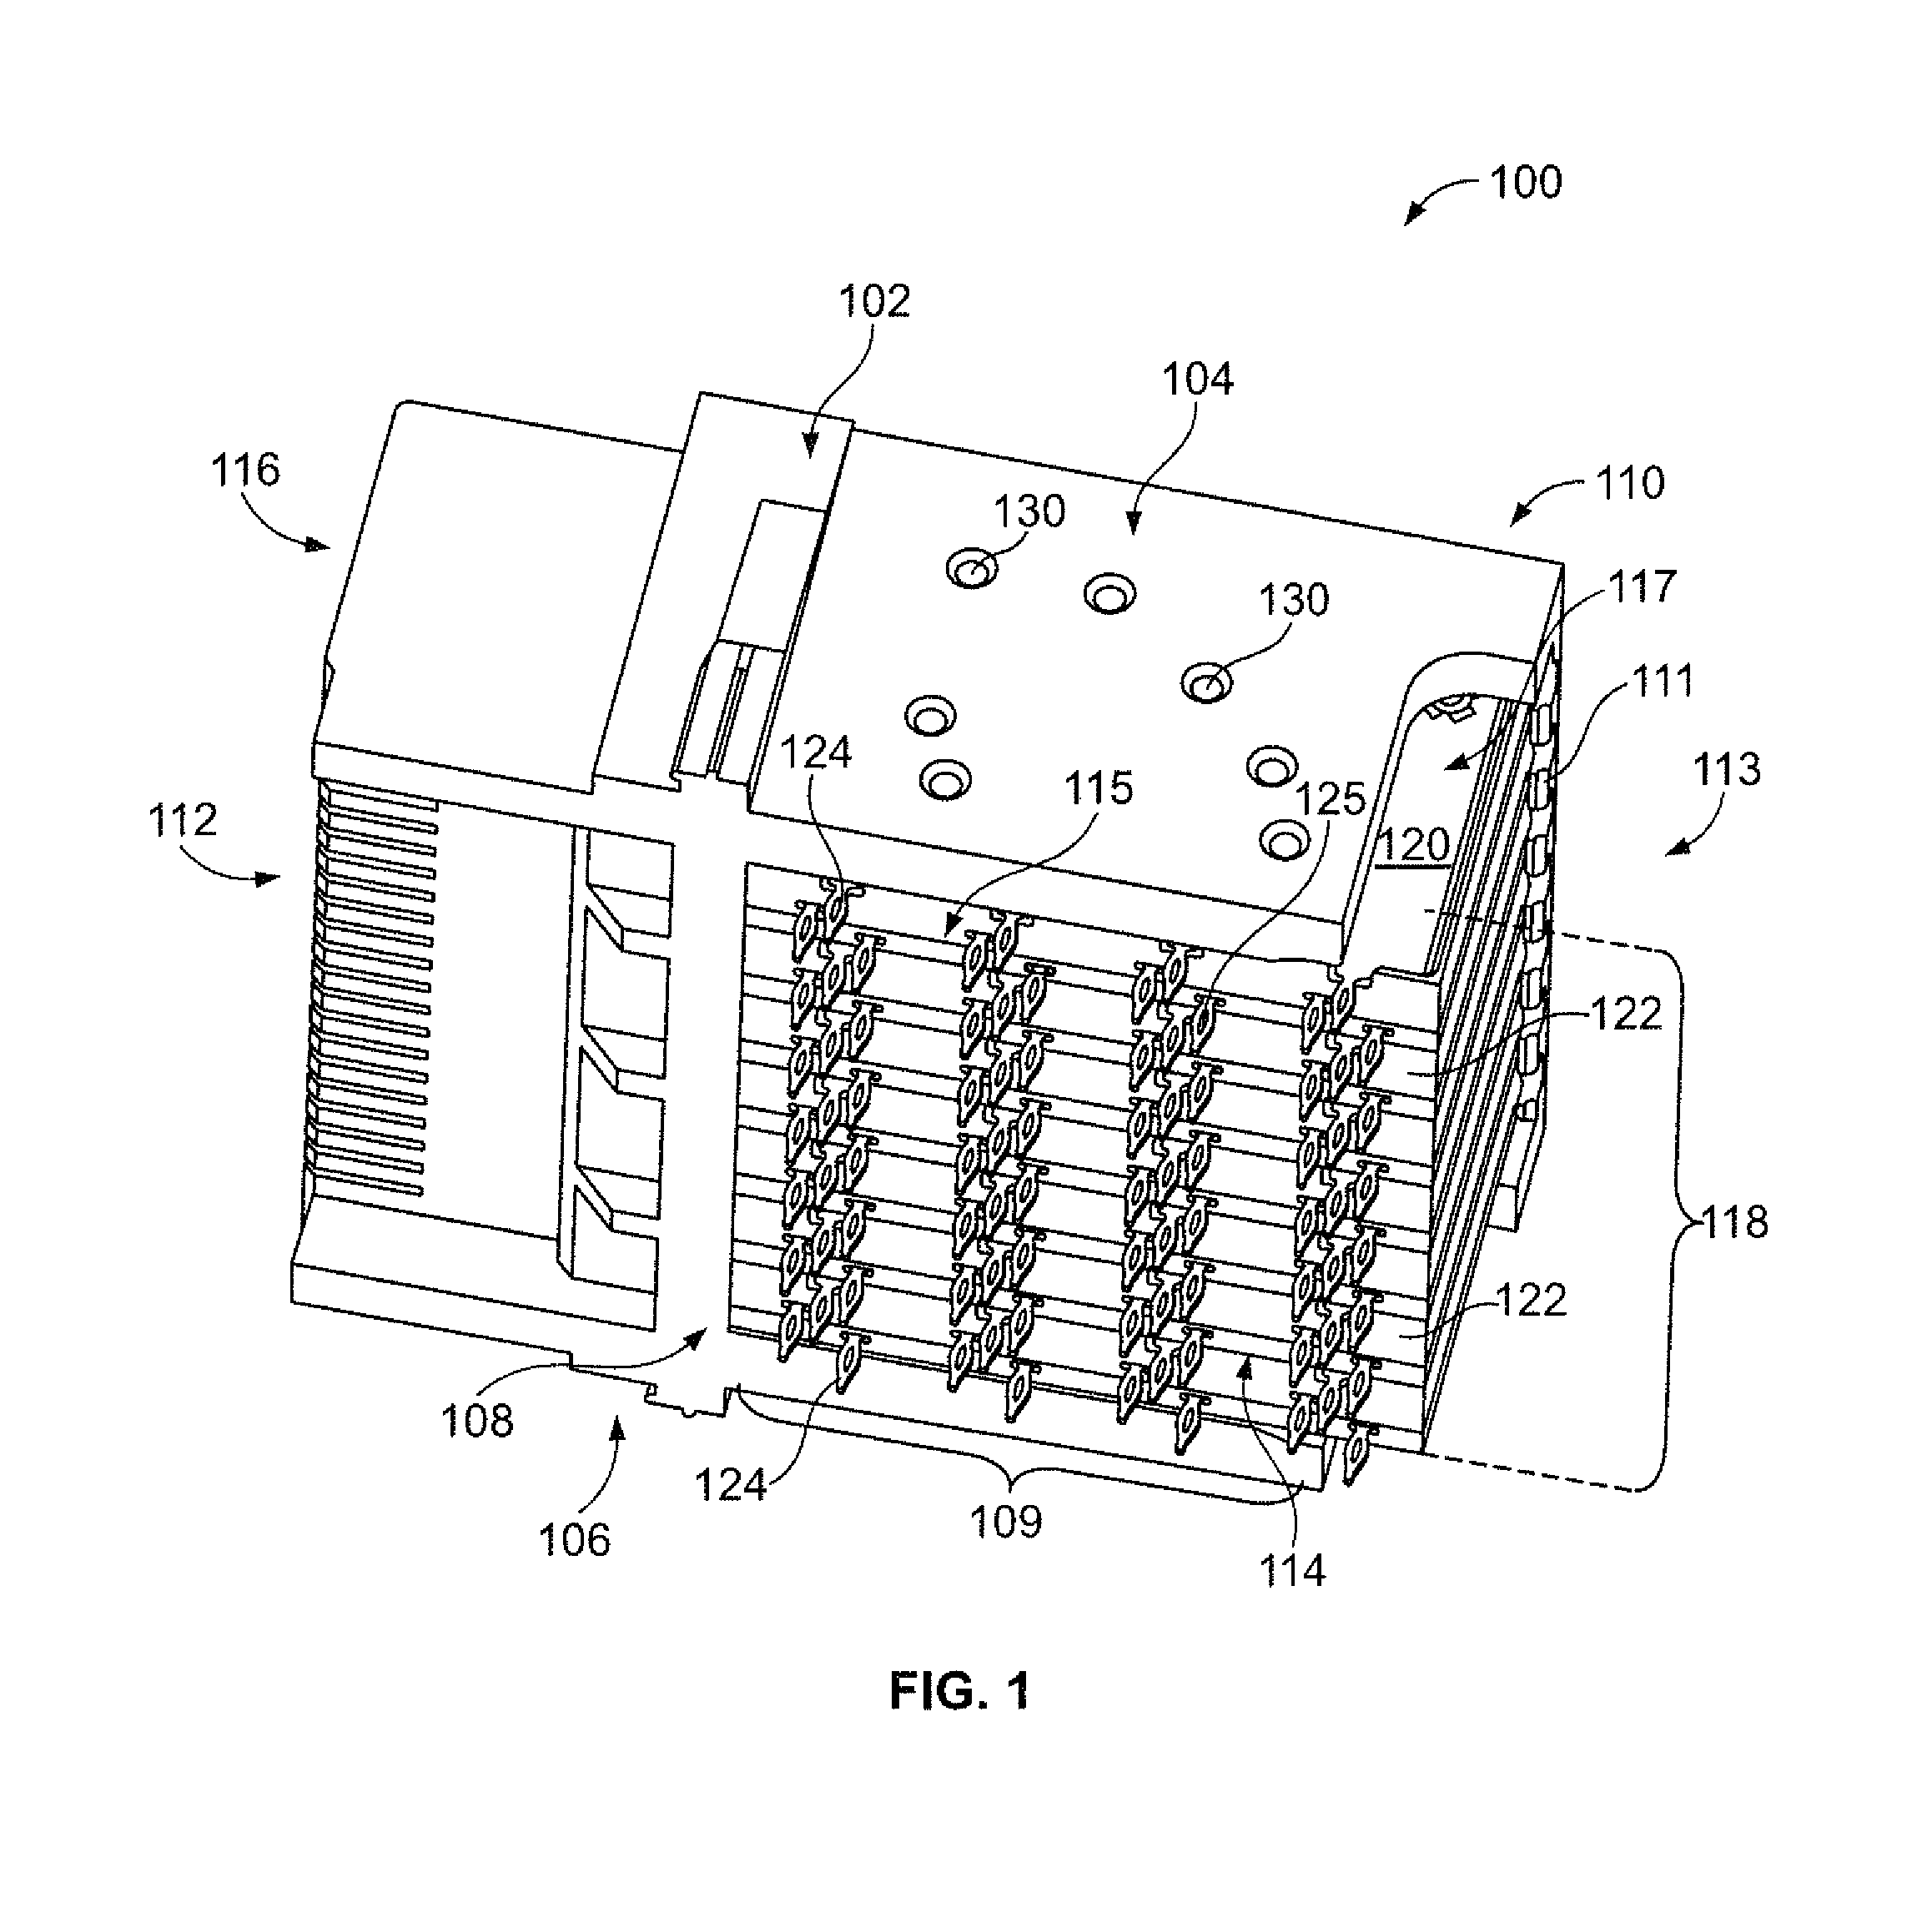 Electrical connector having grounding material